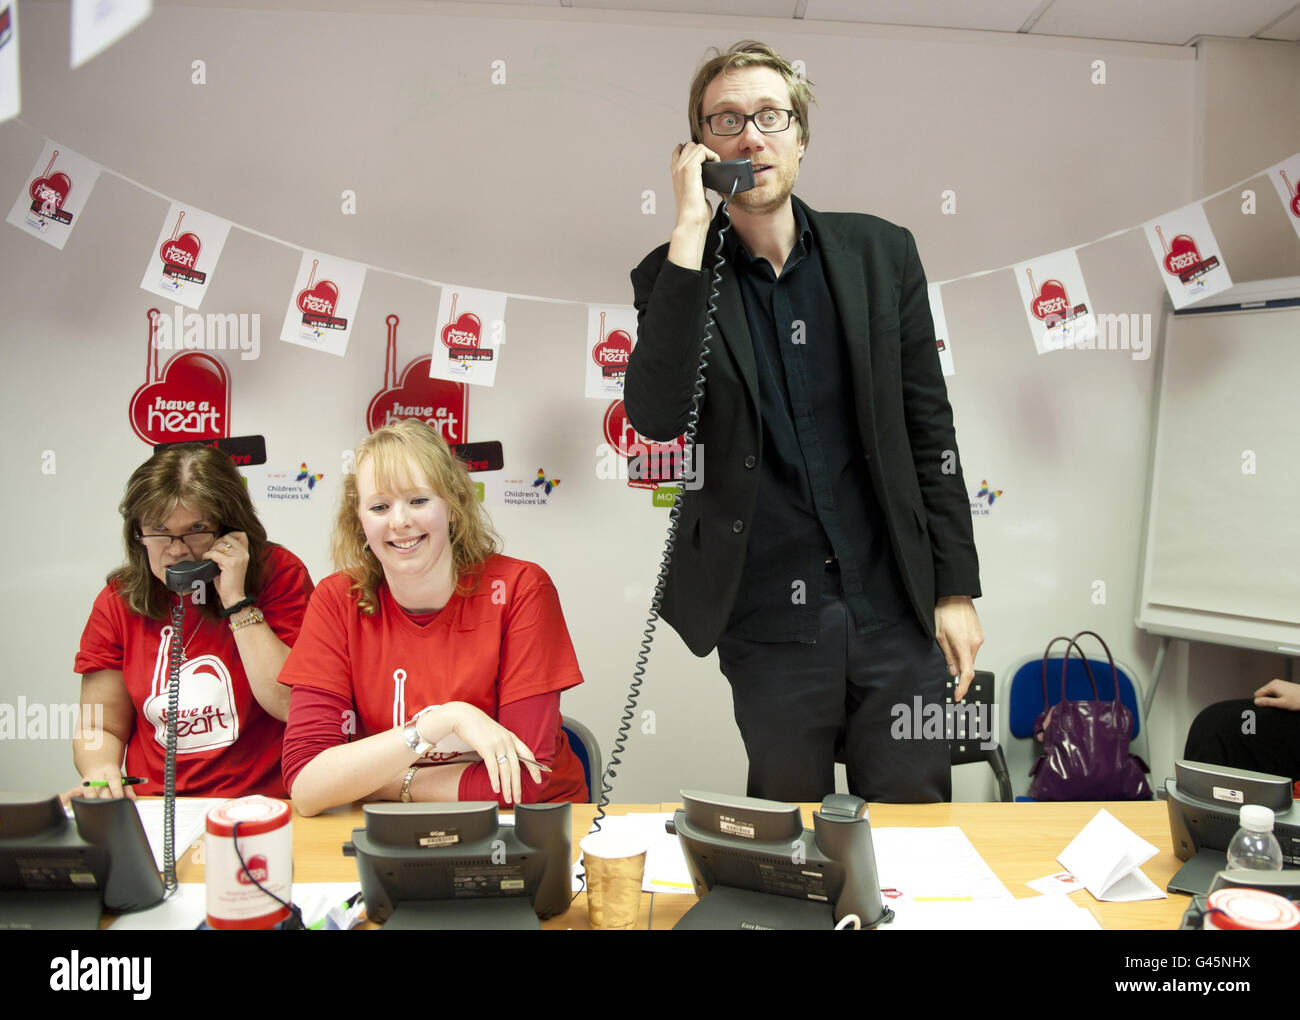 Stephen Merchant manning the telephones during the 2011 Have a Heart appeal, Heart FM's charity raising money for Children's Hospices UK, at the Heart FM studios in central London. Stock Photo